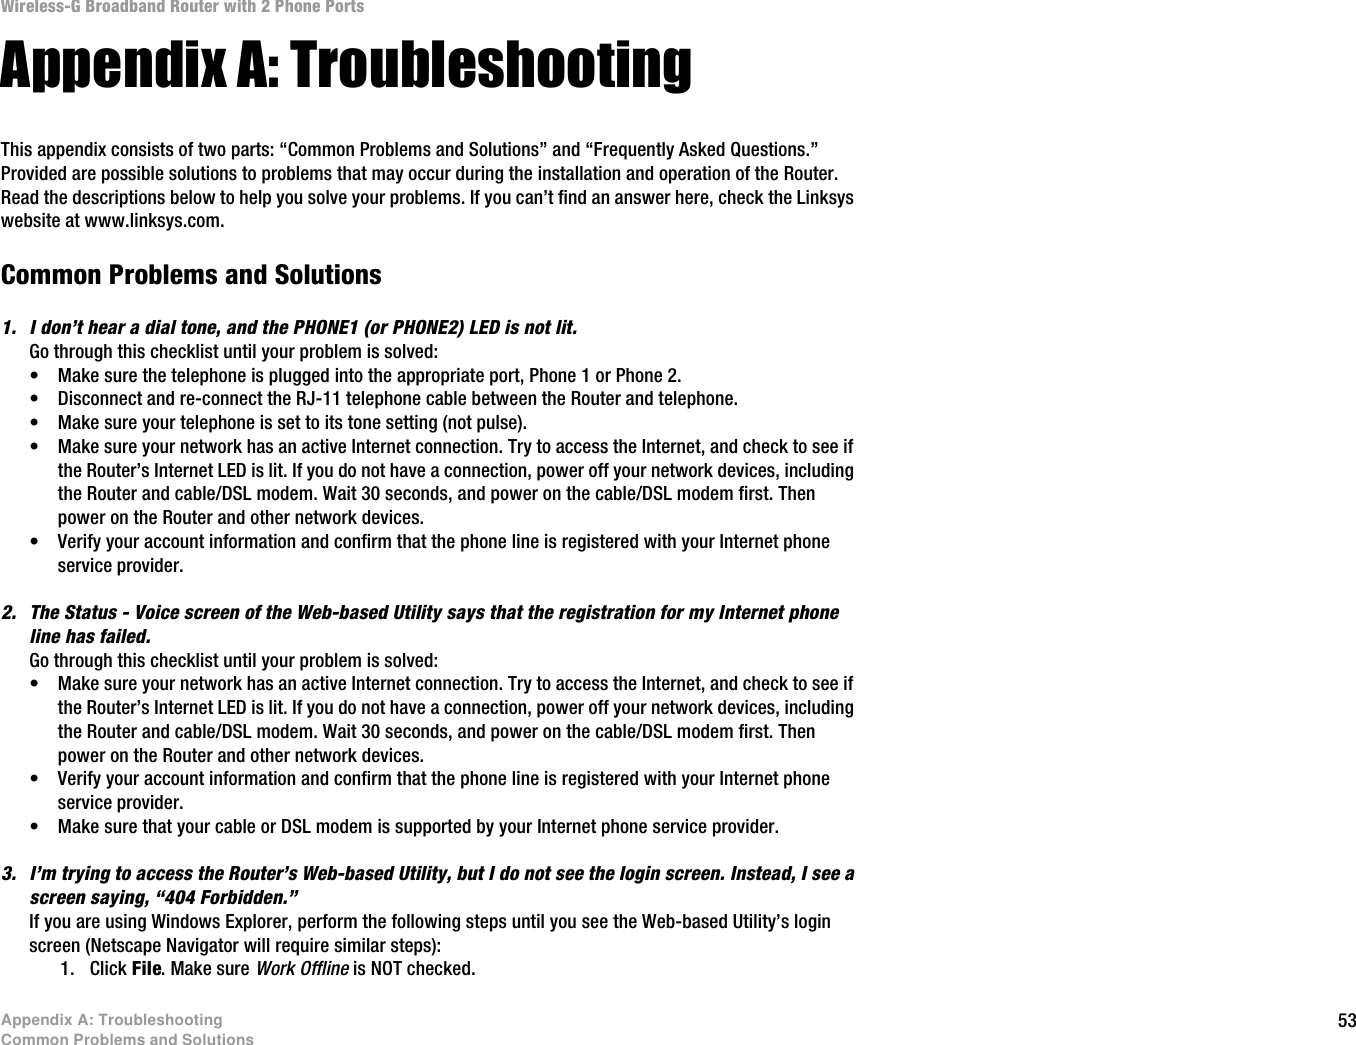 53Appendix A: TroubleshootingCommon Problems and SolutionsWireless-G Broadband Router with 2 Phone PortsAppendix A: TroubleshootingThis appendix consists of two parts: “Common Problems and Solutions” and “Frequently Asked Questions.” Provided are possible solutions to problems that may occur during the installation and operation of the Router. Read the descriptions below to help you solve your problems. If you can’t find an answer here, check the Linksys website at www.linksys.com.Common Problems and Solutions1. I don’t hear a dial tone, and the PHONE1 (or PHONE2) LED is not lit.Go through this checklist until your problem is solved:•Make sure the telephone is plugged into the appropriate port, Phone 1 or Phone 2.•Disconnect and re-connect the RJ-11 telephone cable between the Router and telephone.•Make sure your telephone is set to its tone setting (not pulse).•Make sure your network has an active Internet connection. Try to access the Internet, and check to see if the Router’s Internet LED is lit. If you do not have a connection, power off your network devices, including the Router and cable/DSL modem. Wait 30 seconds, and power on the cable/DSL modem first. Then power on the Router and other network devices.•Verify your account information and confirm that the phone line is registered with your Internet phone service provider.2. The Status - Voice screen of the Web-based Utility says that the registration for my Internet phone line has failed.Go through this checklist until your problem is solved:•Make sure your network has an active Internet connection. Try to access the Internet, and check to see if the Router’s Internet LED is lit. If you do not have a connection, power off your network devices, including the Router and cable/DSL modem. Wait 30 seconds, and power on the cable/DSL modem first. Then power on the Router and other network devices.•Verify your account information and confirm that the phone line is registered with your Internet phone service provider.•Make sure that your cable or DSL modem is supported by your Internet phone service provider.3. I’m trying to access the Router’s Web-based Utility, but I do not see the login screen. Instead, I see a screen saying, “404 Forbidden.”If you are using Windows Explorer, perform the following steps until you see the Web-based Utility’s login screen (Netscape Navigator will require similar steps):1. Click File. Make sure Work Offline is NOT checked.